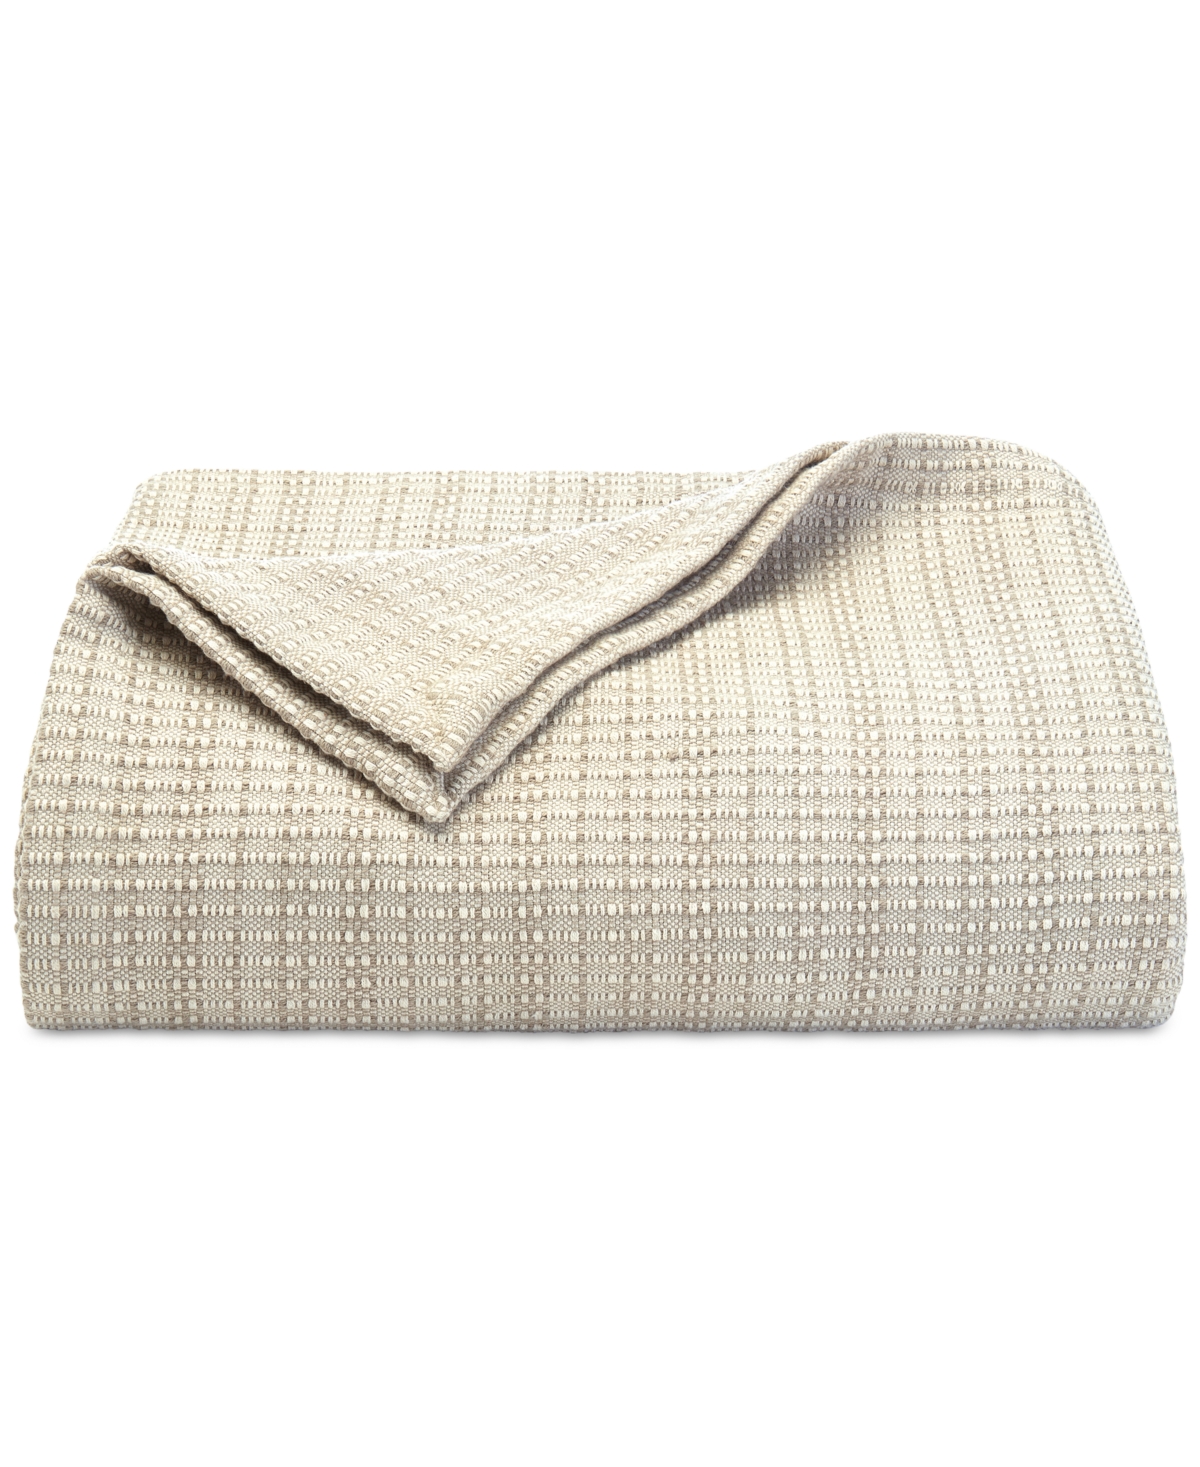 TOMMY BAHAMA HOME TOMMY BAHAMA BAMBOO WOVEN COTTON REVERSIBLE BLANKET, TWIN BEDDING